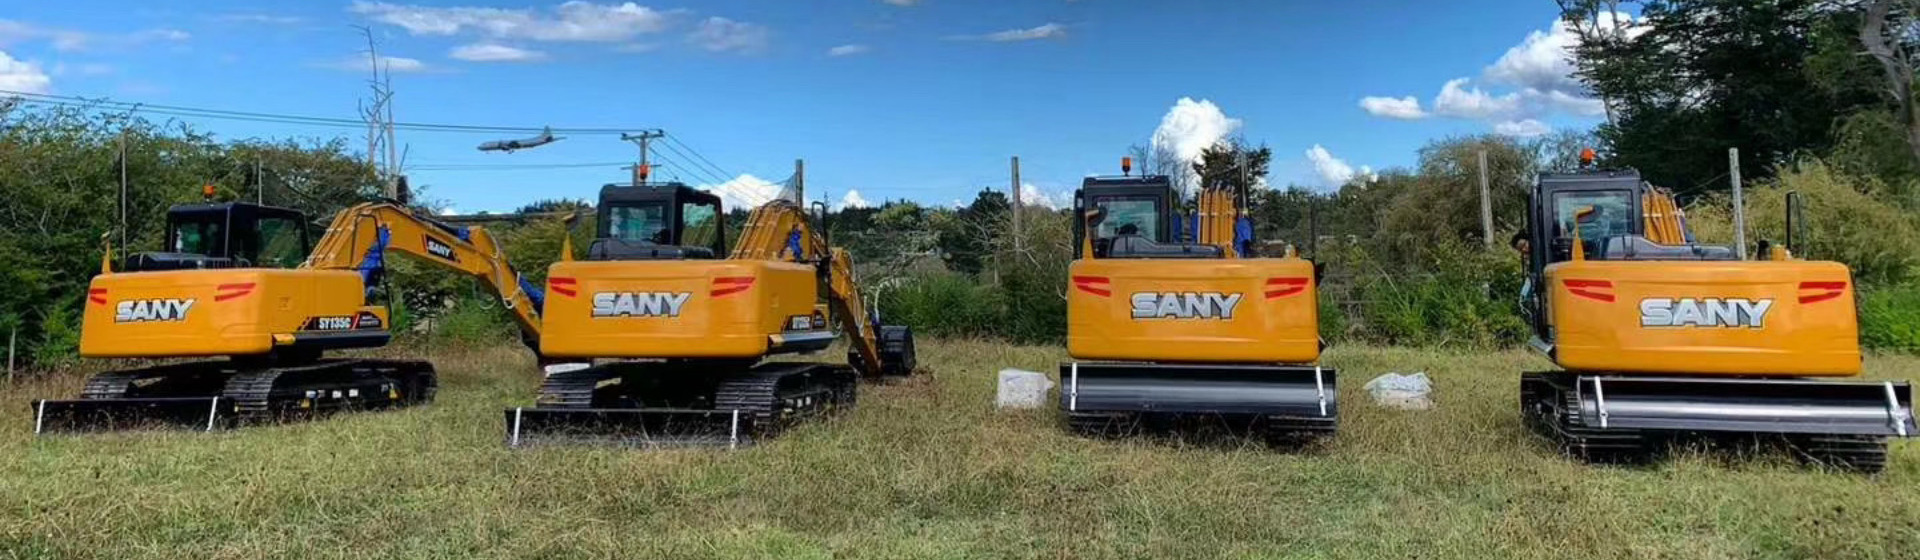 Welcome to our Latest New Zealand Sany Dealer!